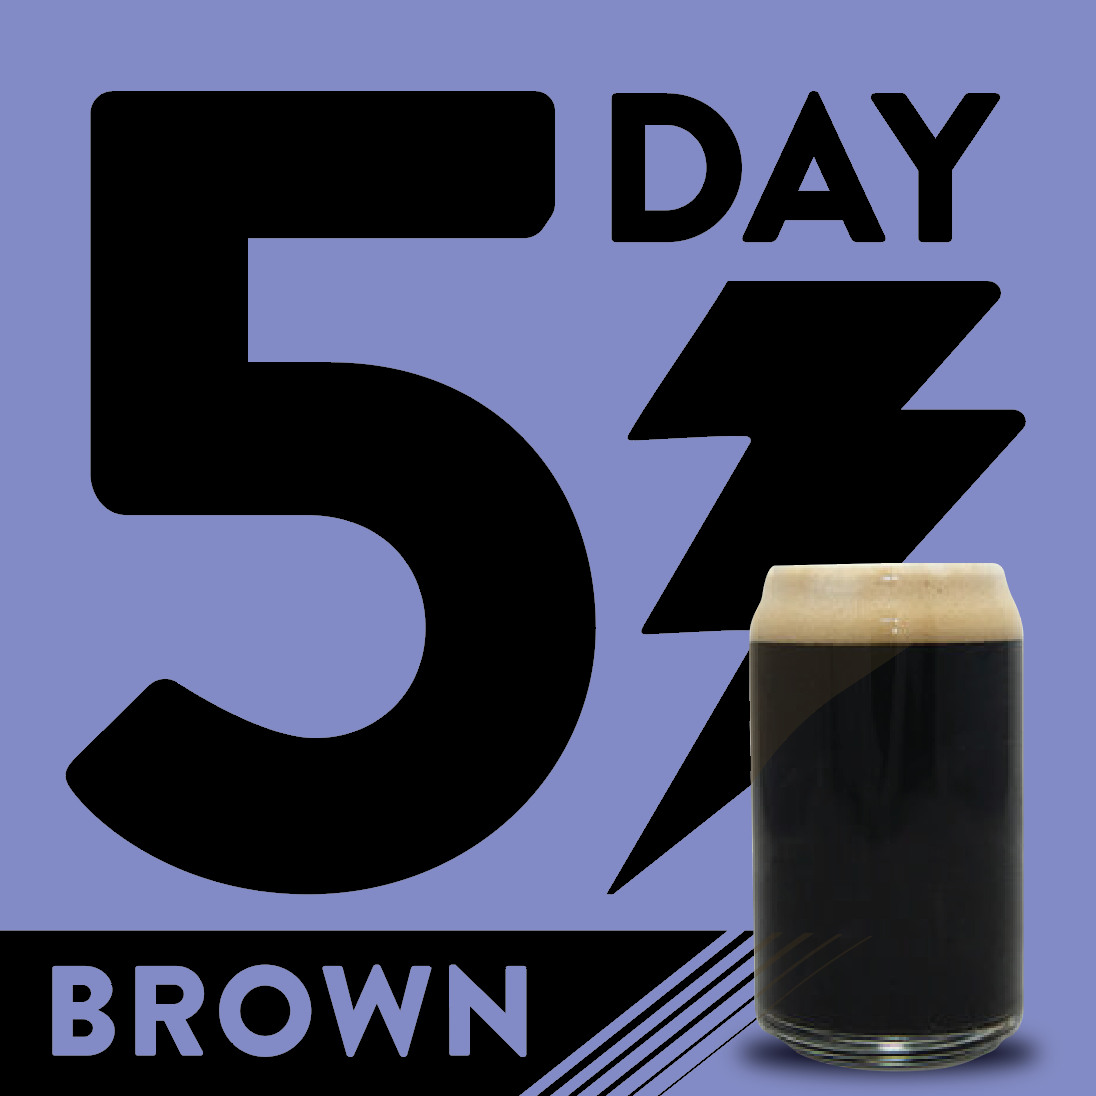 5DAY Brown